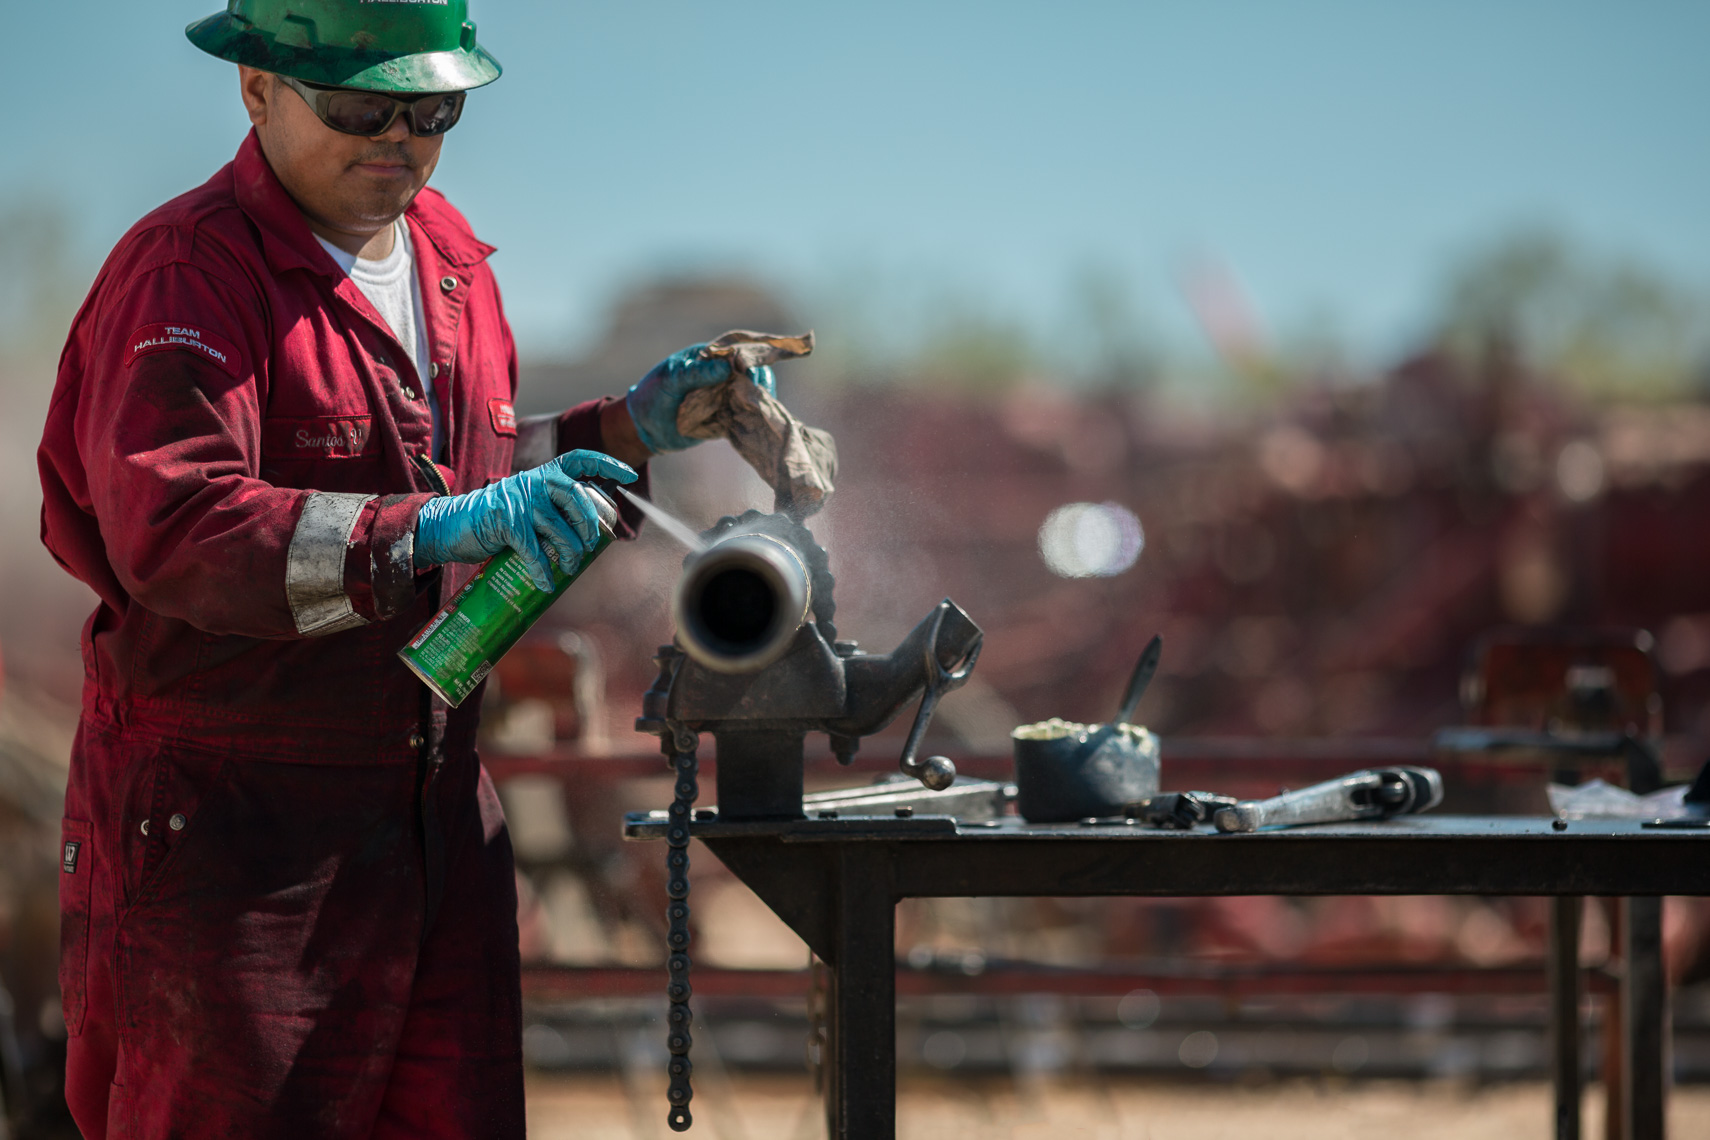 Lifestyle Photo Of Oil & Gas Worker Spraying Pipe by Jason Risner Photography